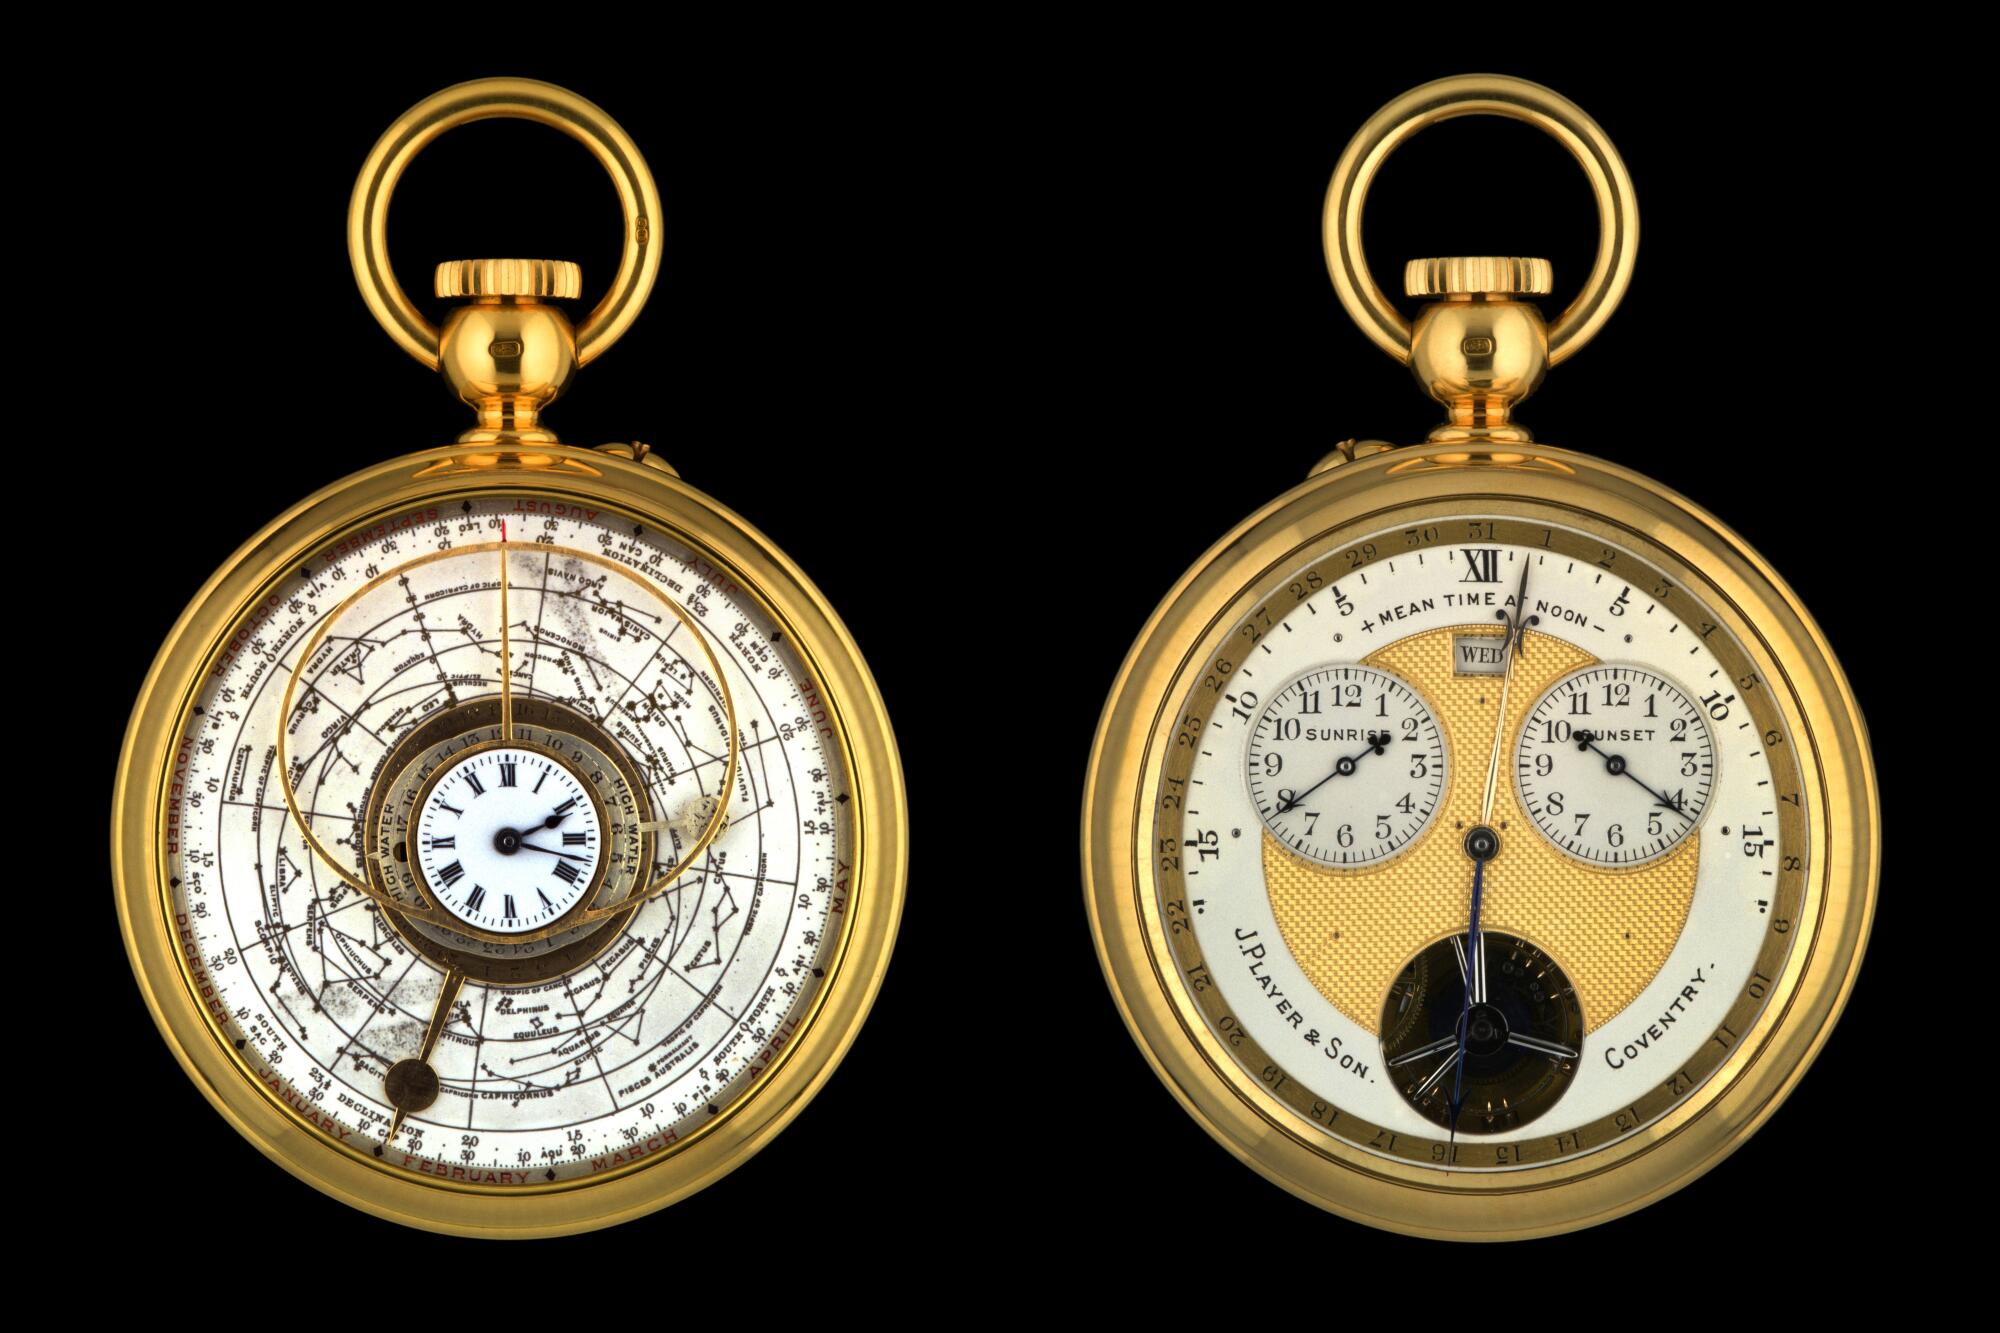 Color photos of the front and back of the J. Player & Son supercomplication gold pocket watch